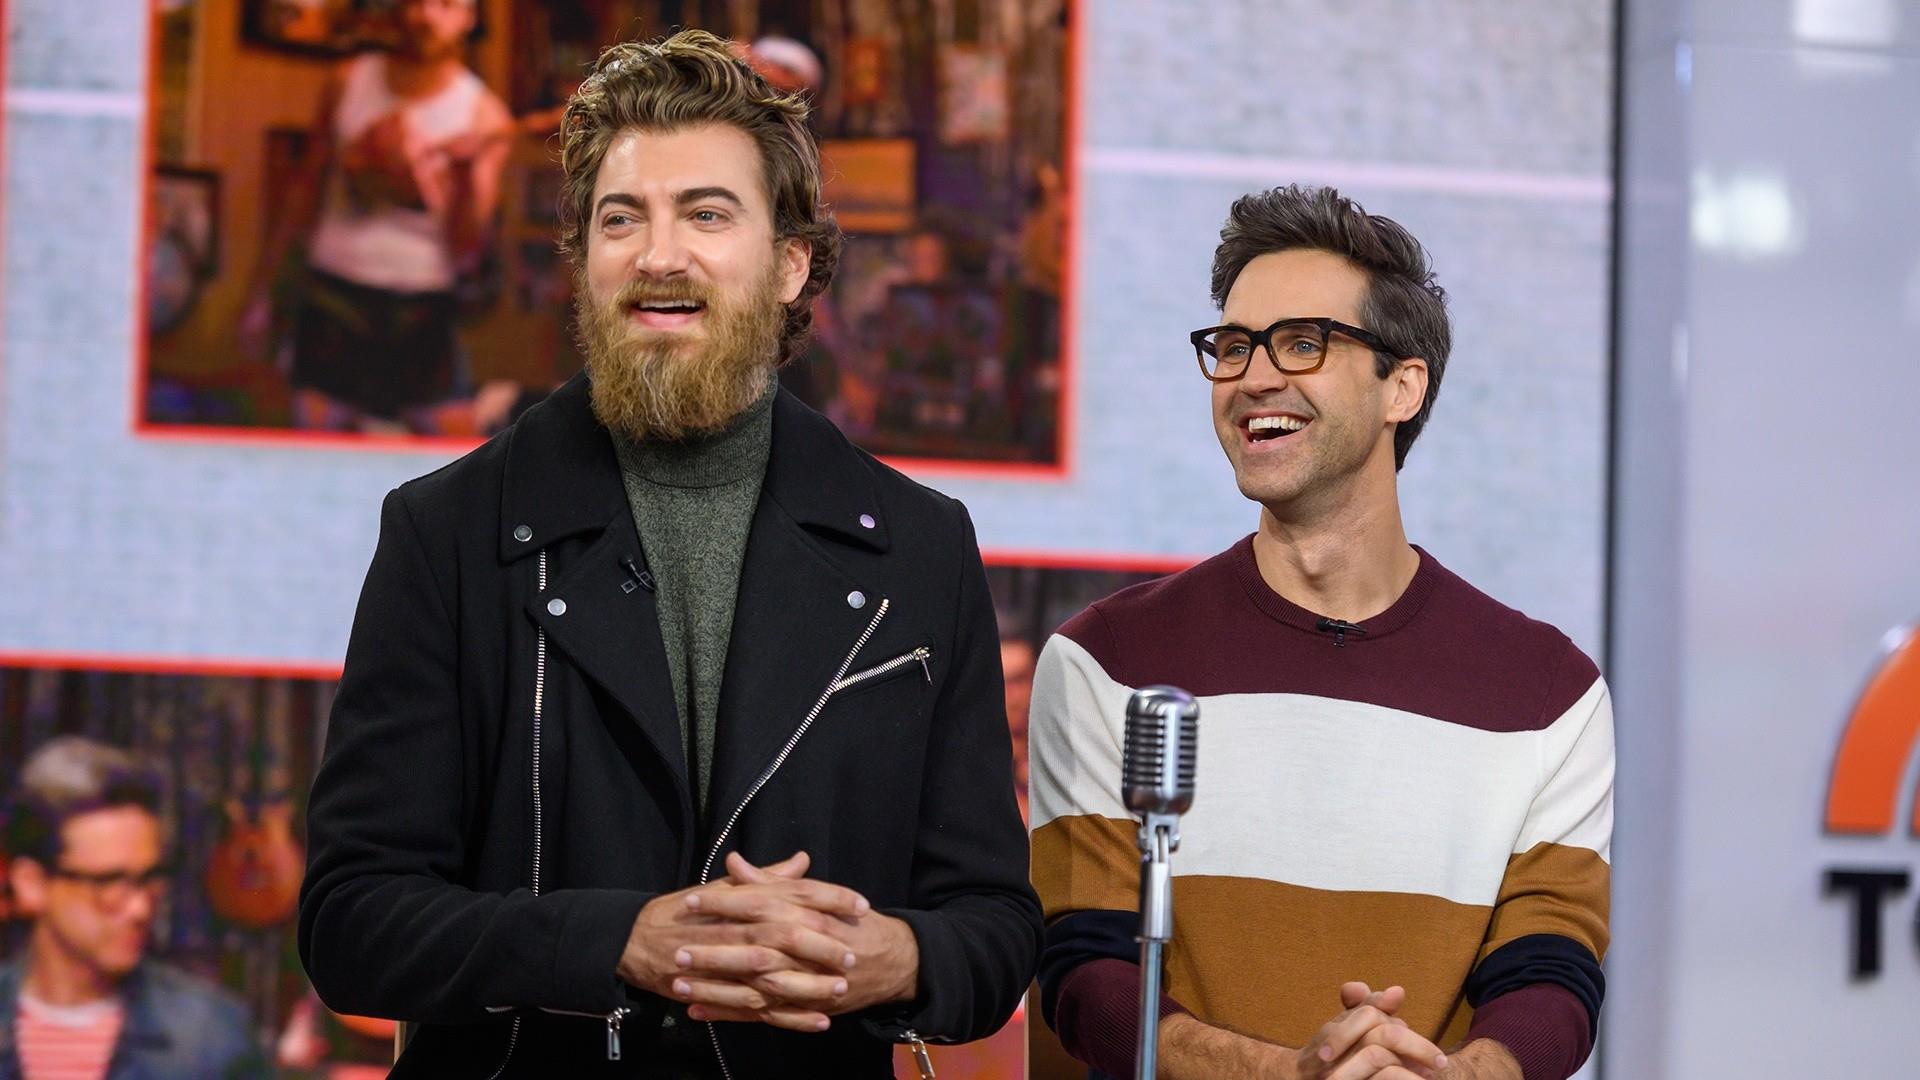 Good Mythical Morning' duo Rhett and Link talk about their hit show.